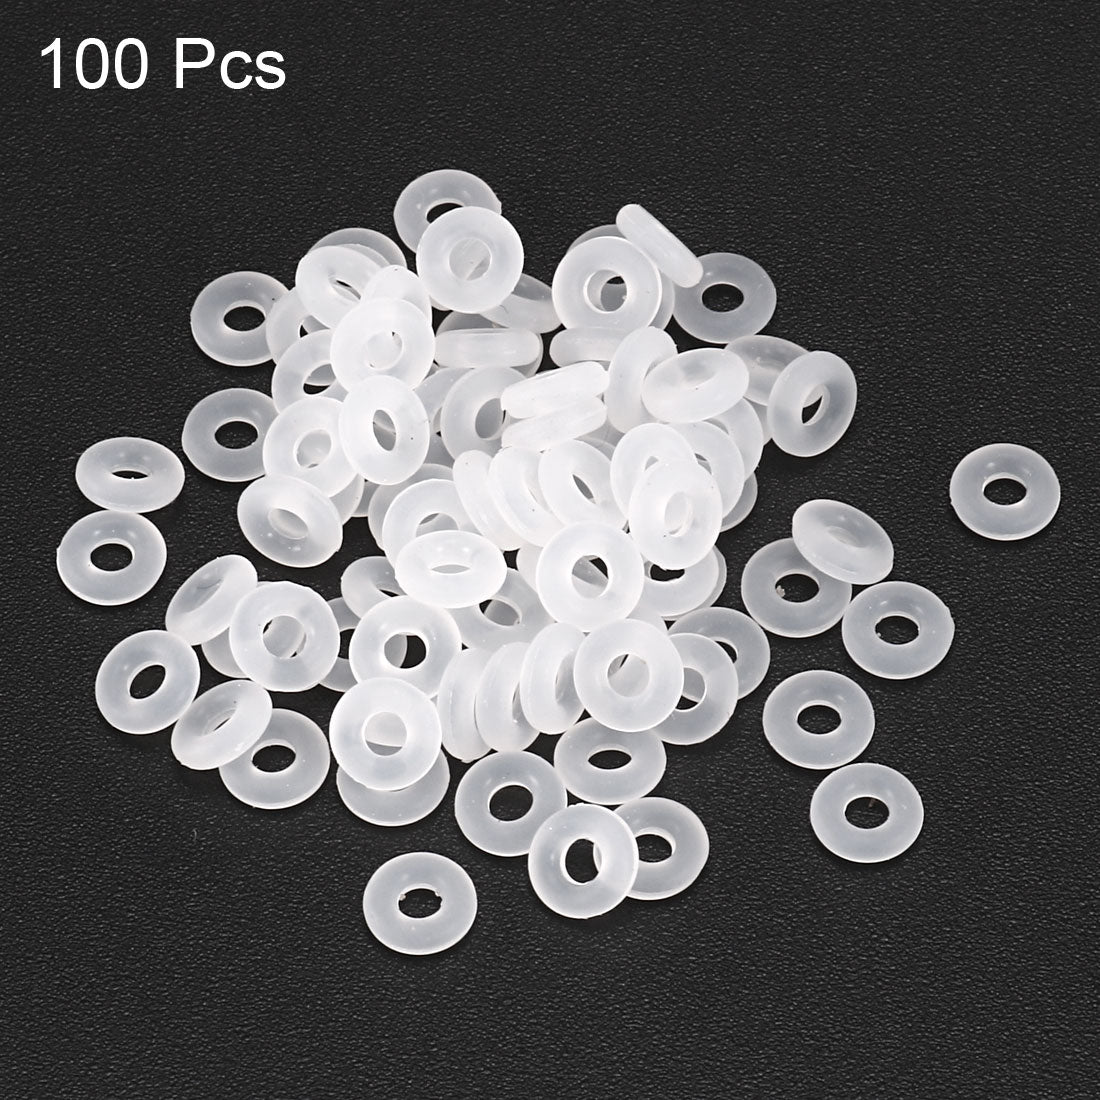 uxcell Uxcell 100Pcs White 9mm x 1.5mm Silicone Rubber Gasket O Ring Sealing Ring